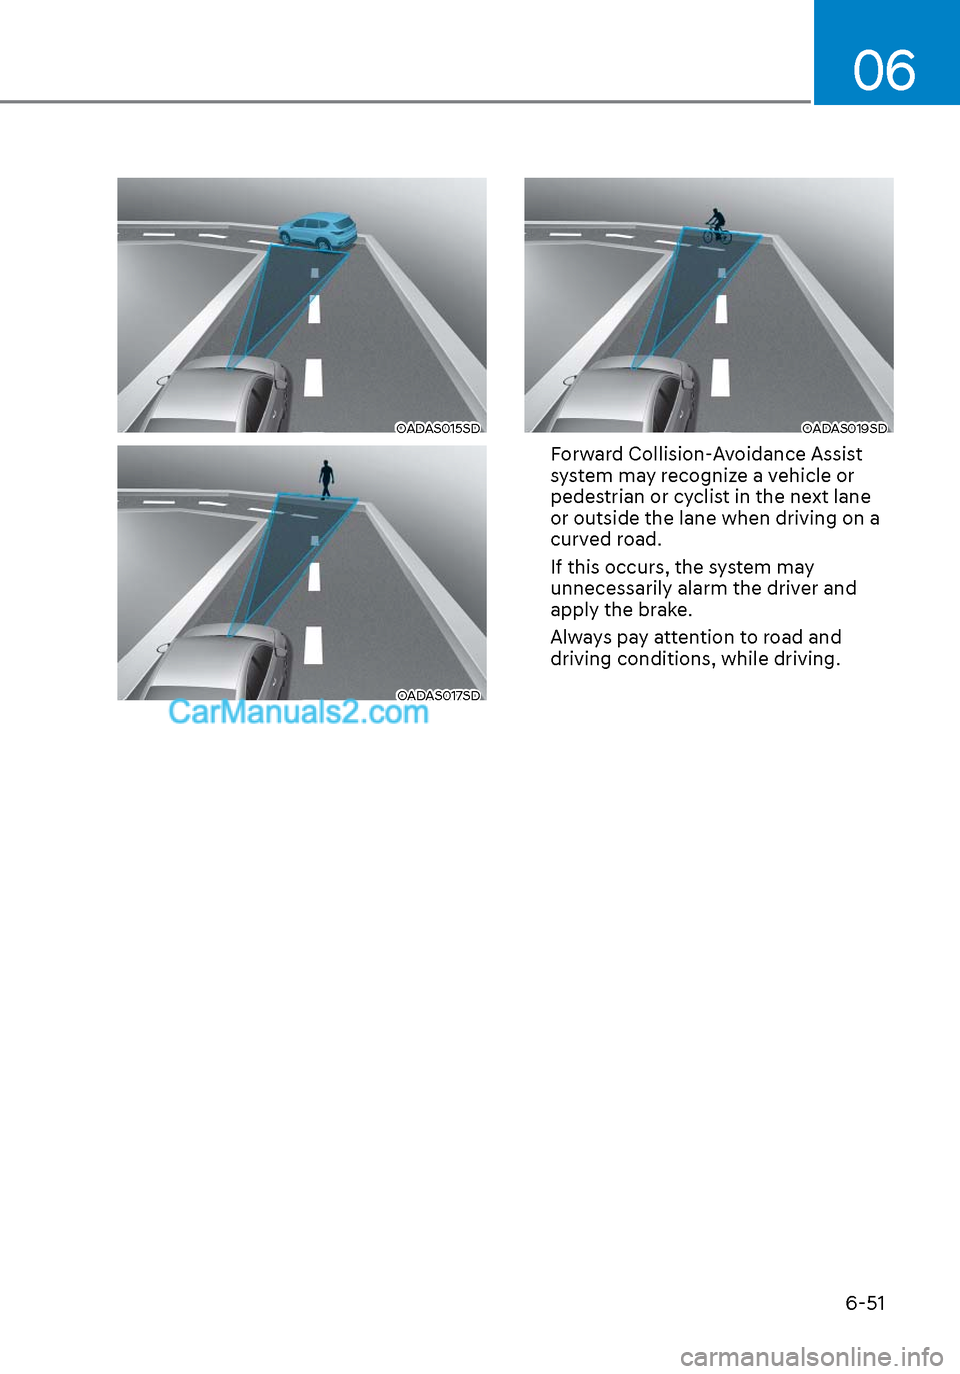 Hyundai Sonata 2020 User Guide 06
6-51
OADAS015SDOADAS015SD
OADAS017SDOADAS017SD
OADAS019SDOADAS019SD
Forward Collision-Avoidance Assist 
system may recognize a vehicle or 
pedestrian or cyclist in the next lane  
or outside the la